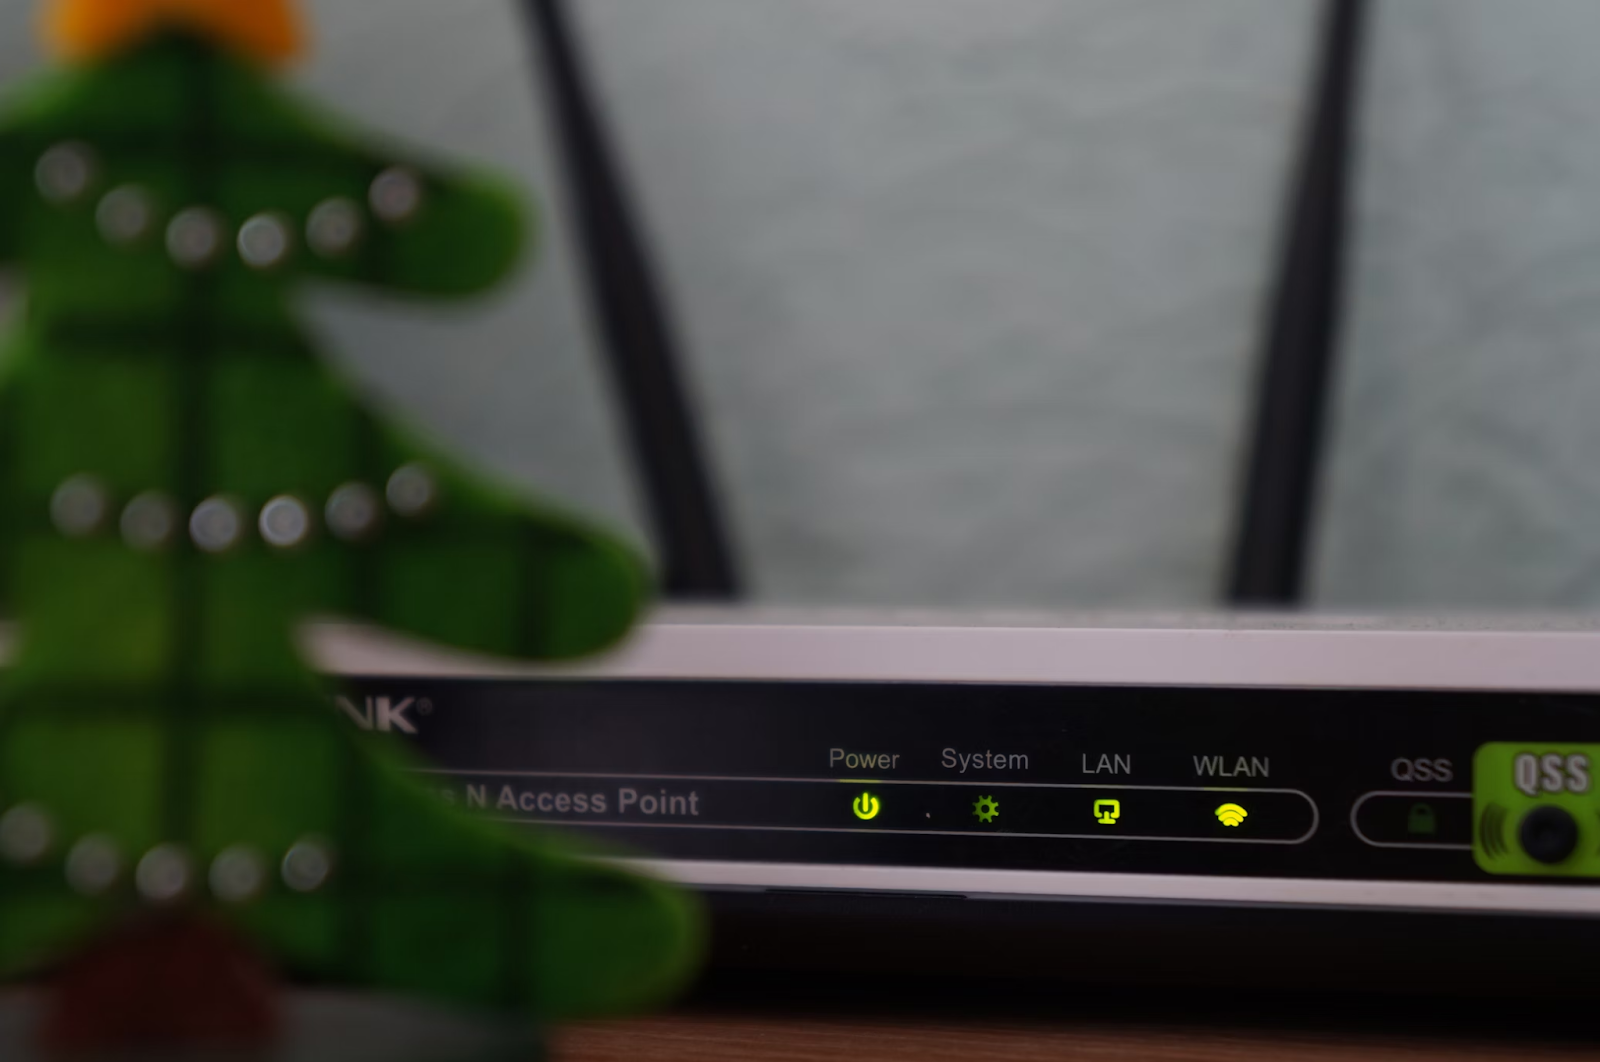 A modem-router with a white and black design, featuring four indicator lights